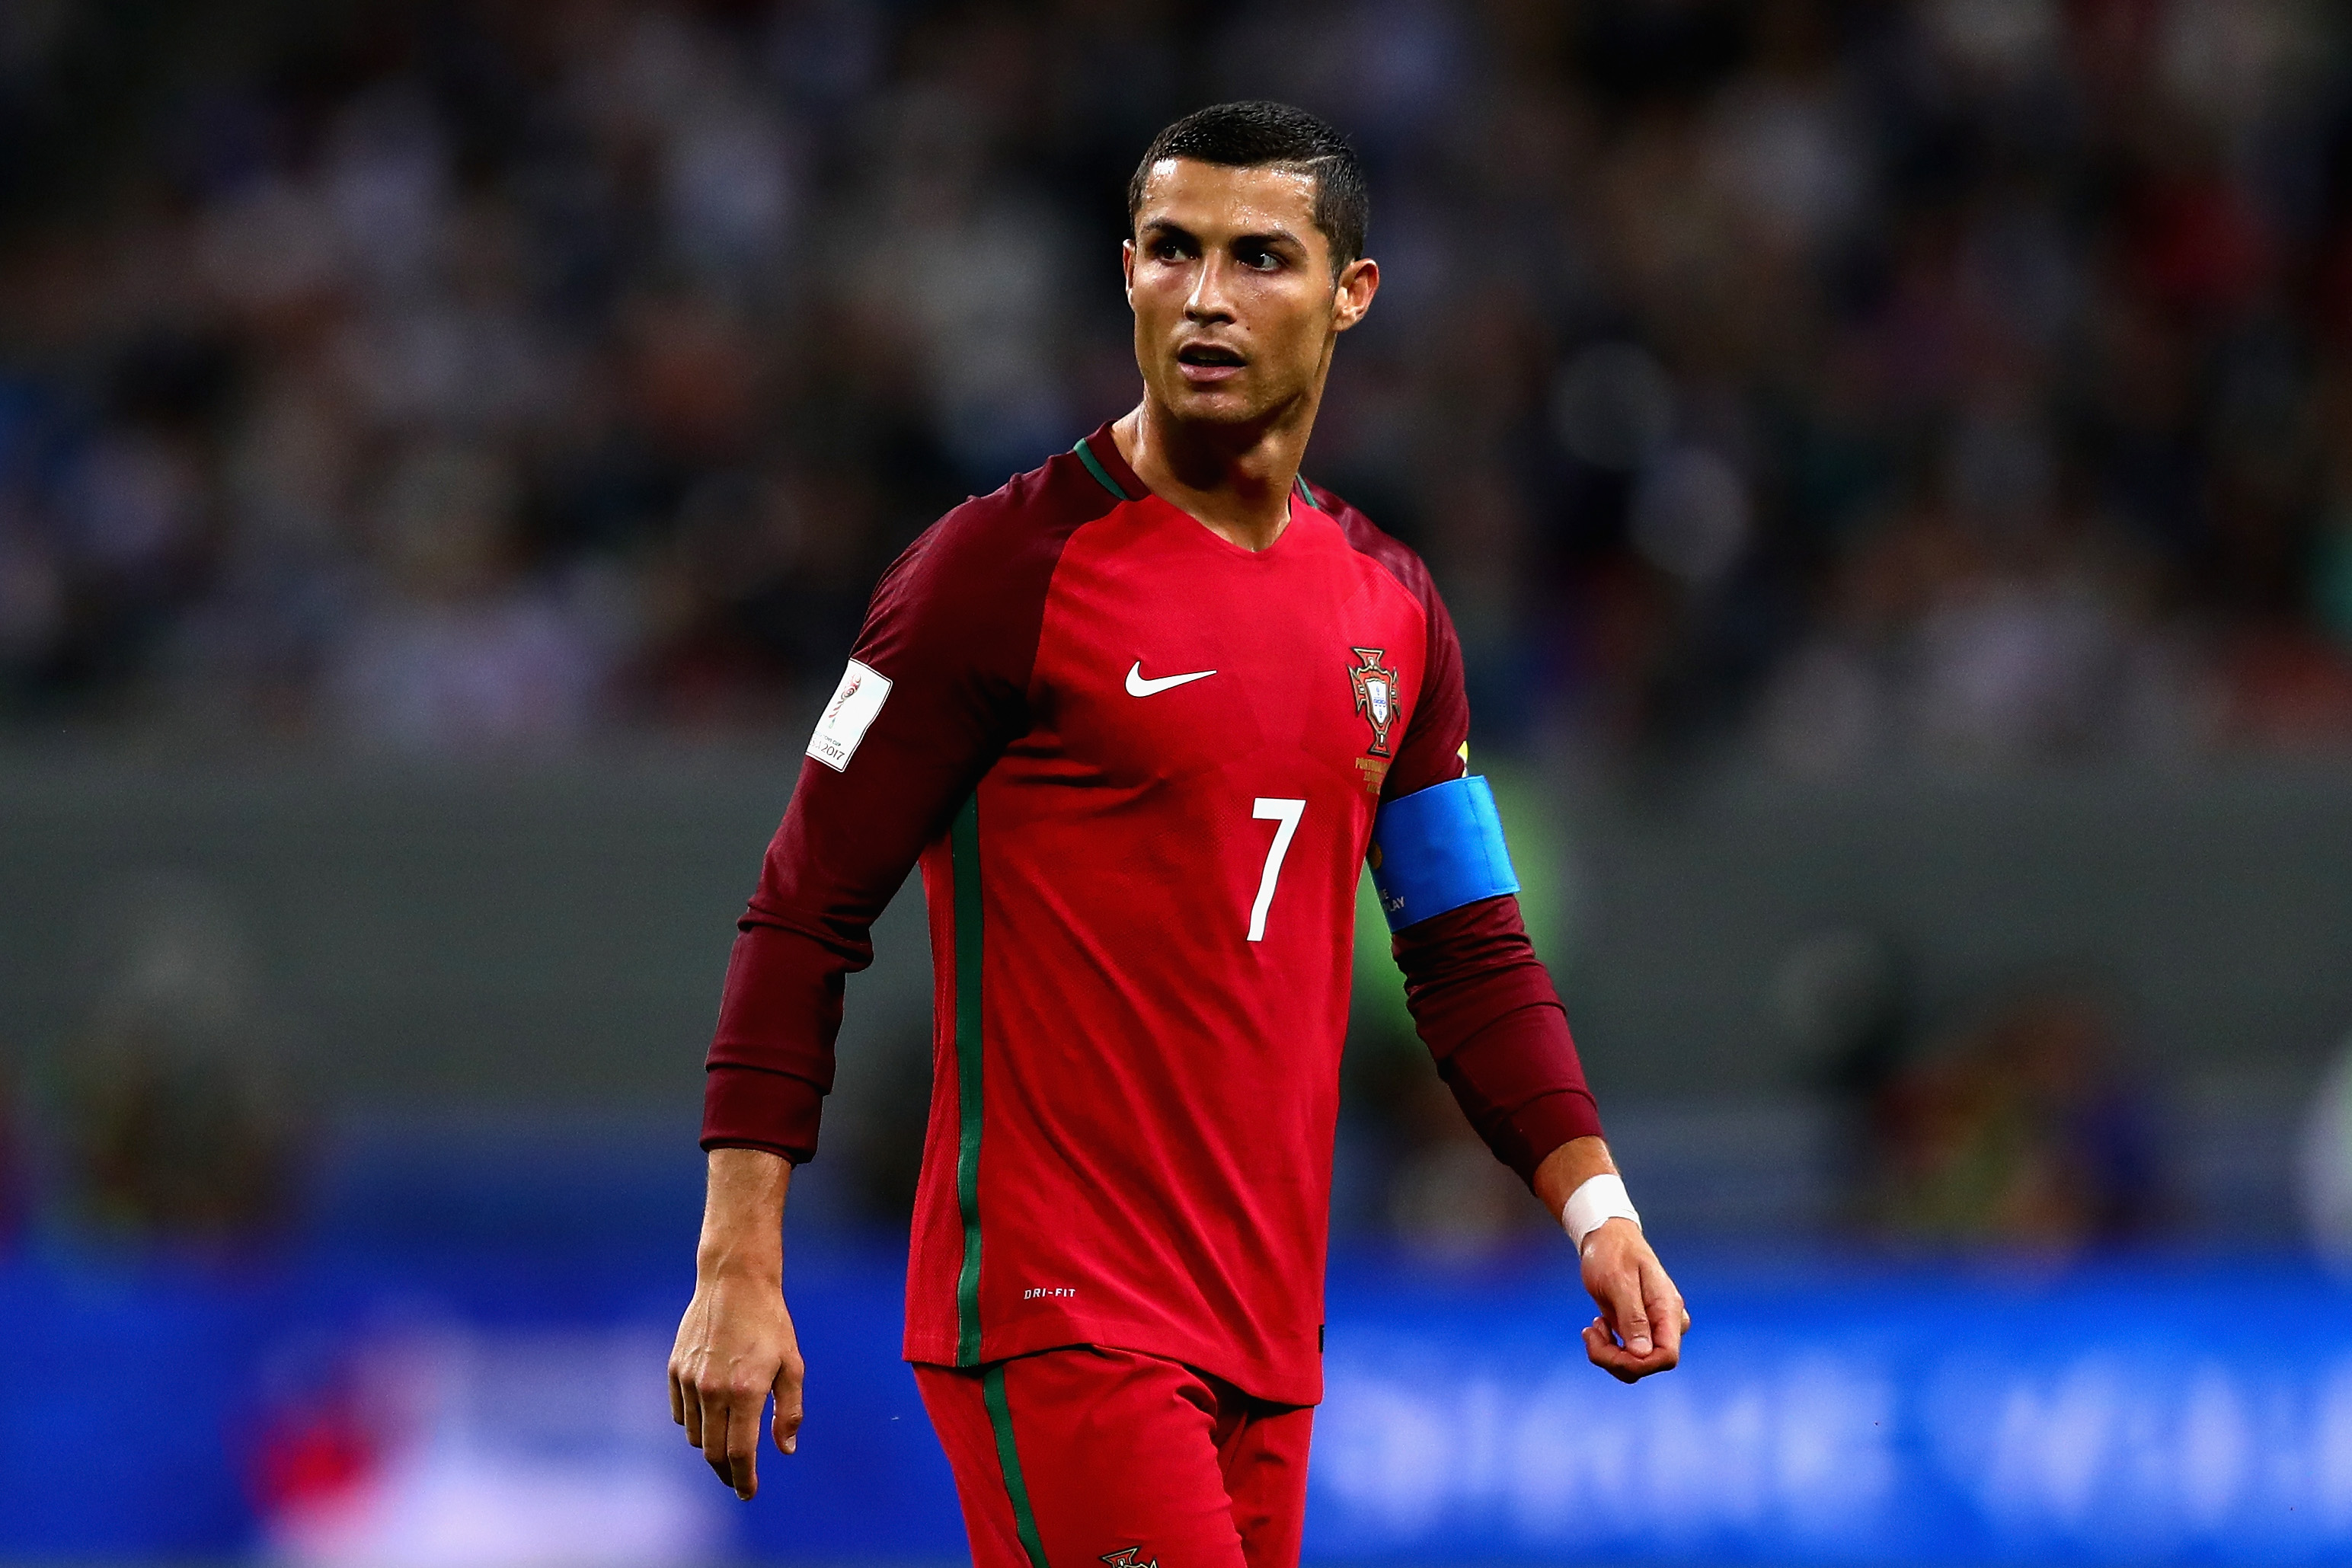 Cristiano Ronaldo of Portugal in action during the FIFA Confederations Cup Russia 2017 Semi-Final between Portugal and Chile at Kazan Arena on June 28, 2017 in Kazan, Russia. (Chris Brunskill Ltd—Getty Images)